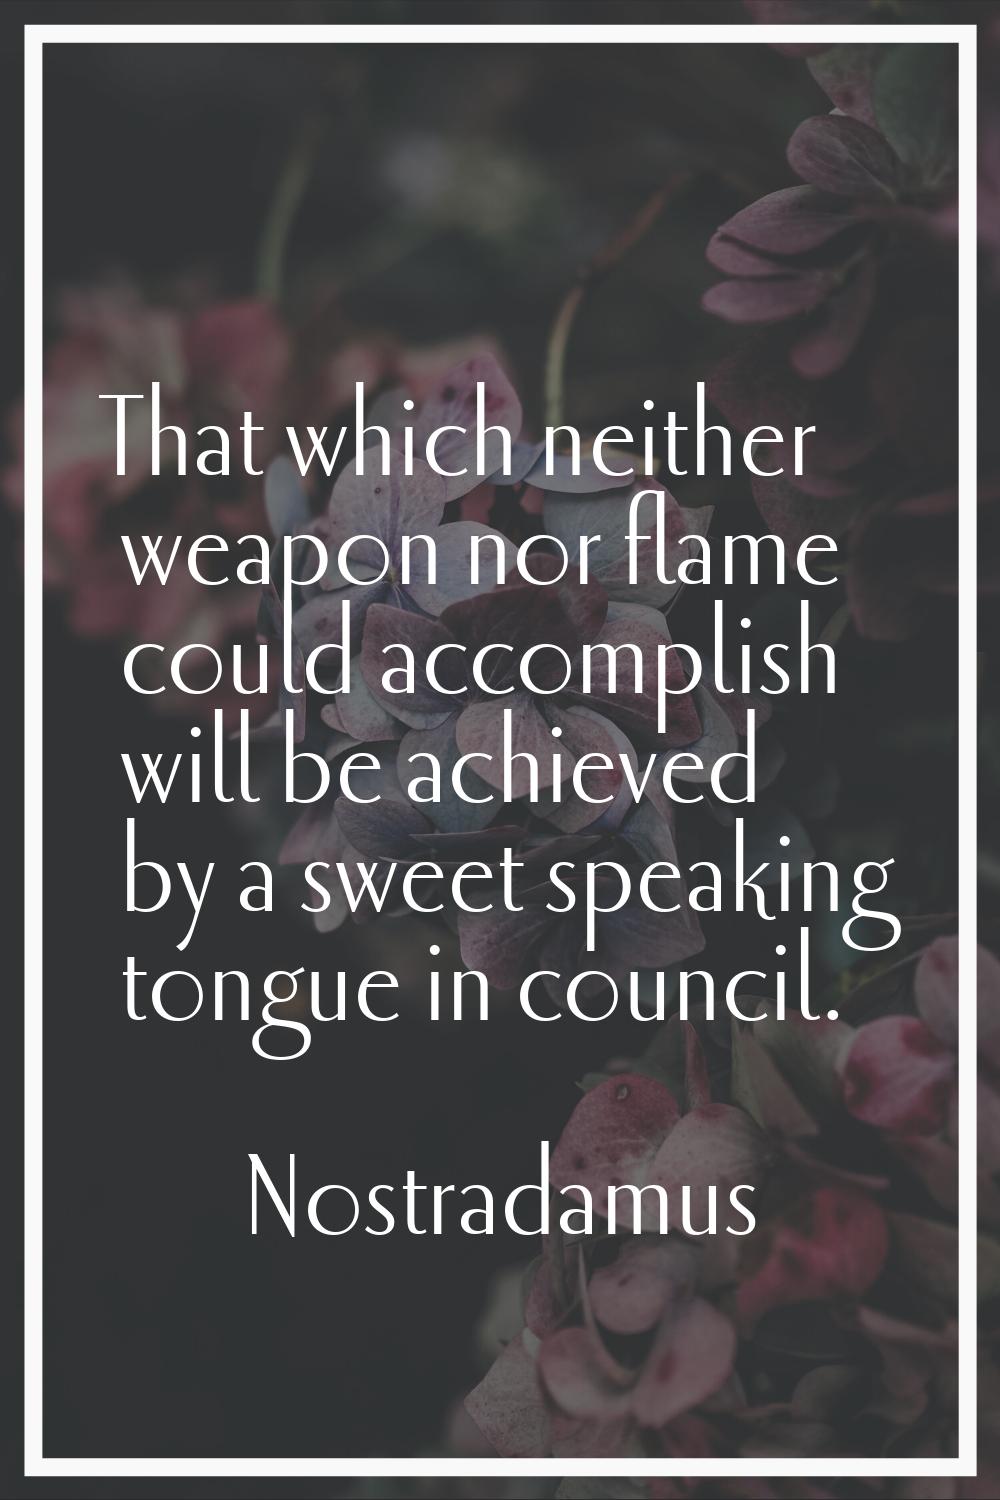 That which neither weapon nor flame could accomplish will be achieved by a sweet speaking tongue in